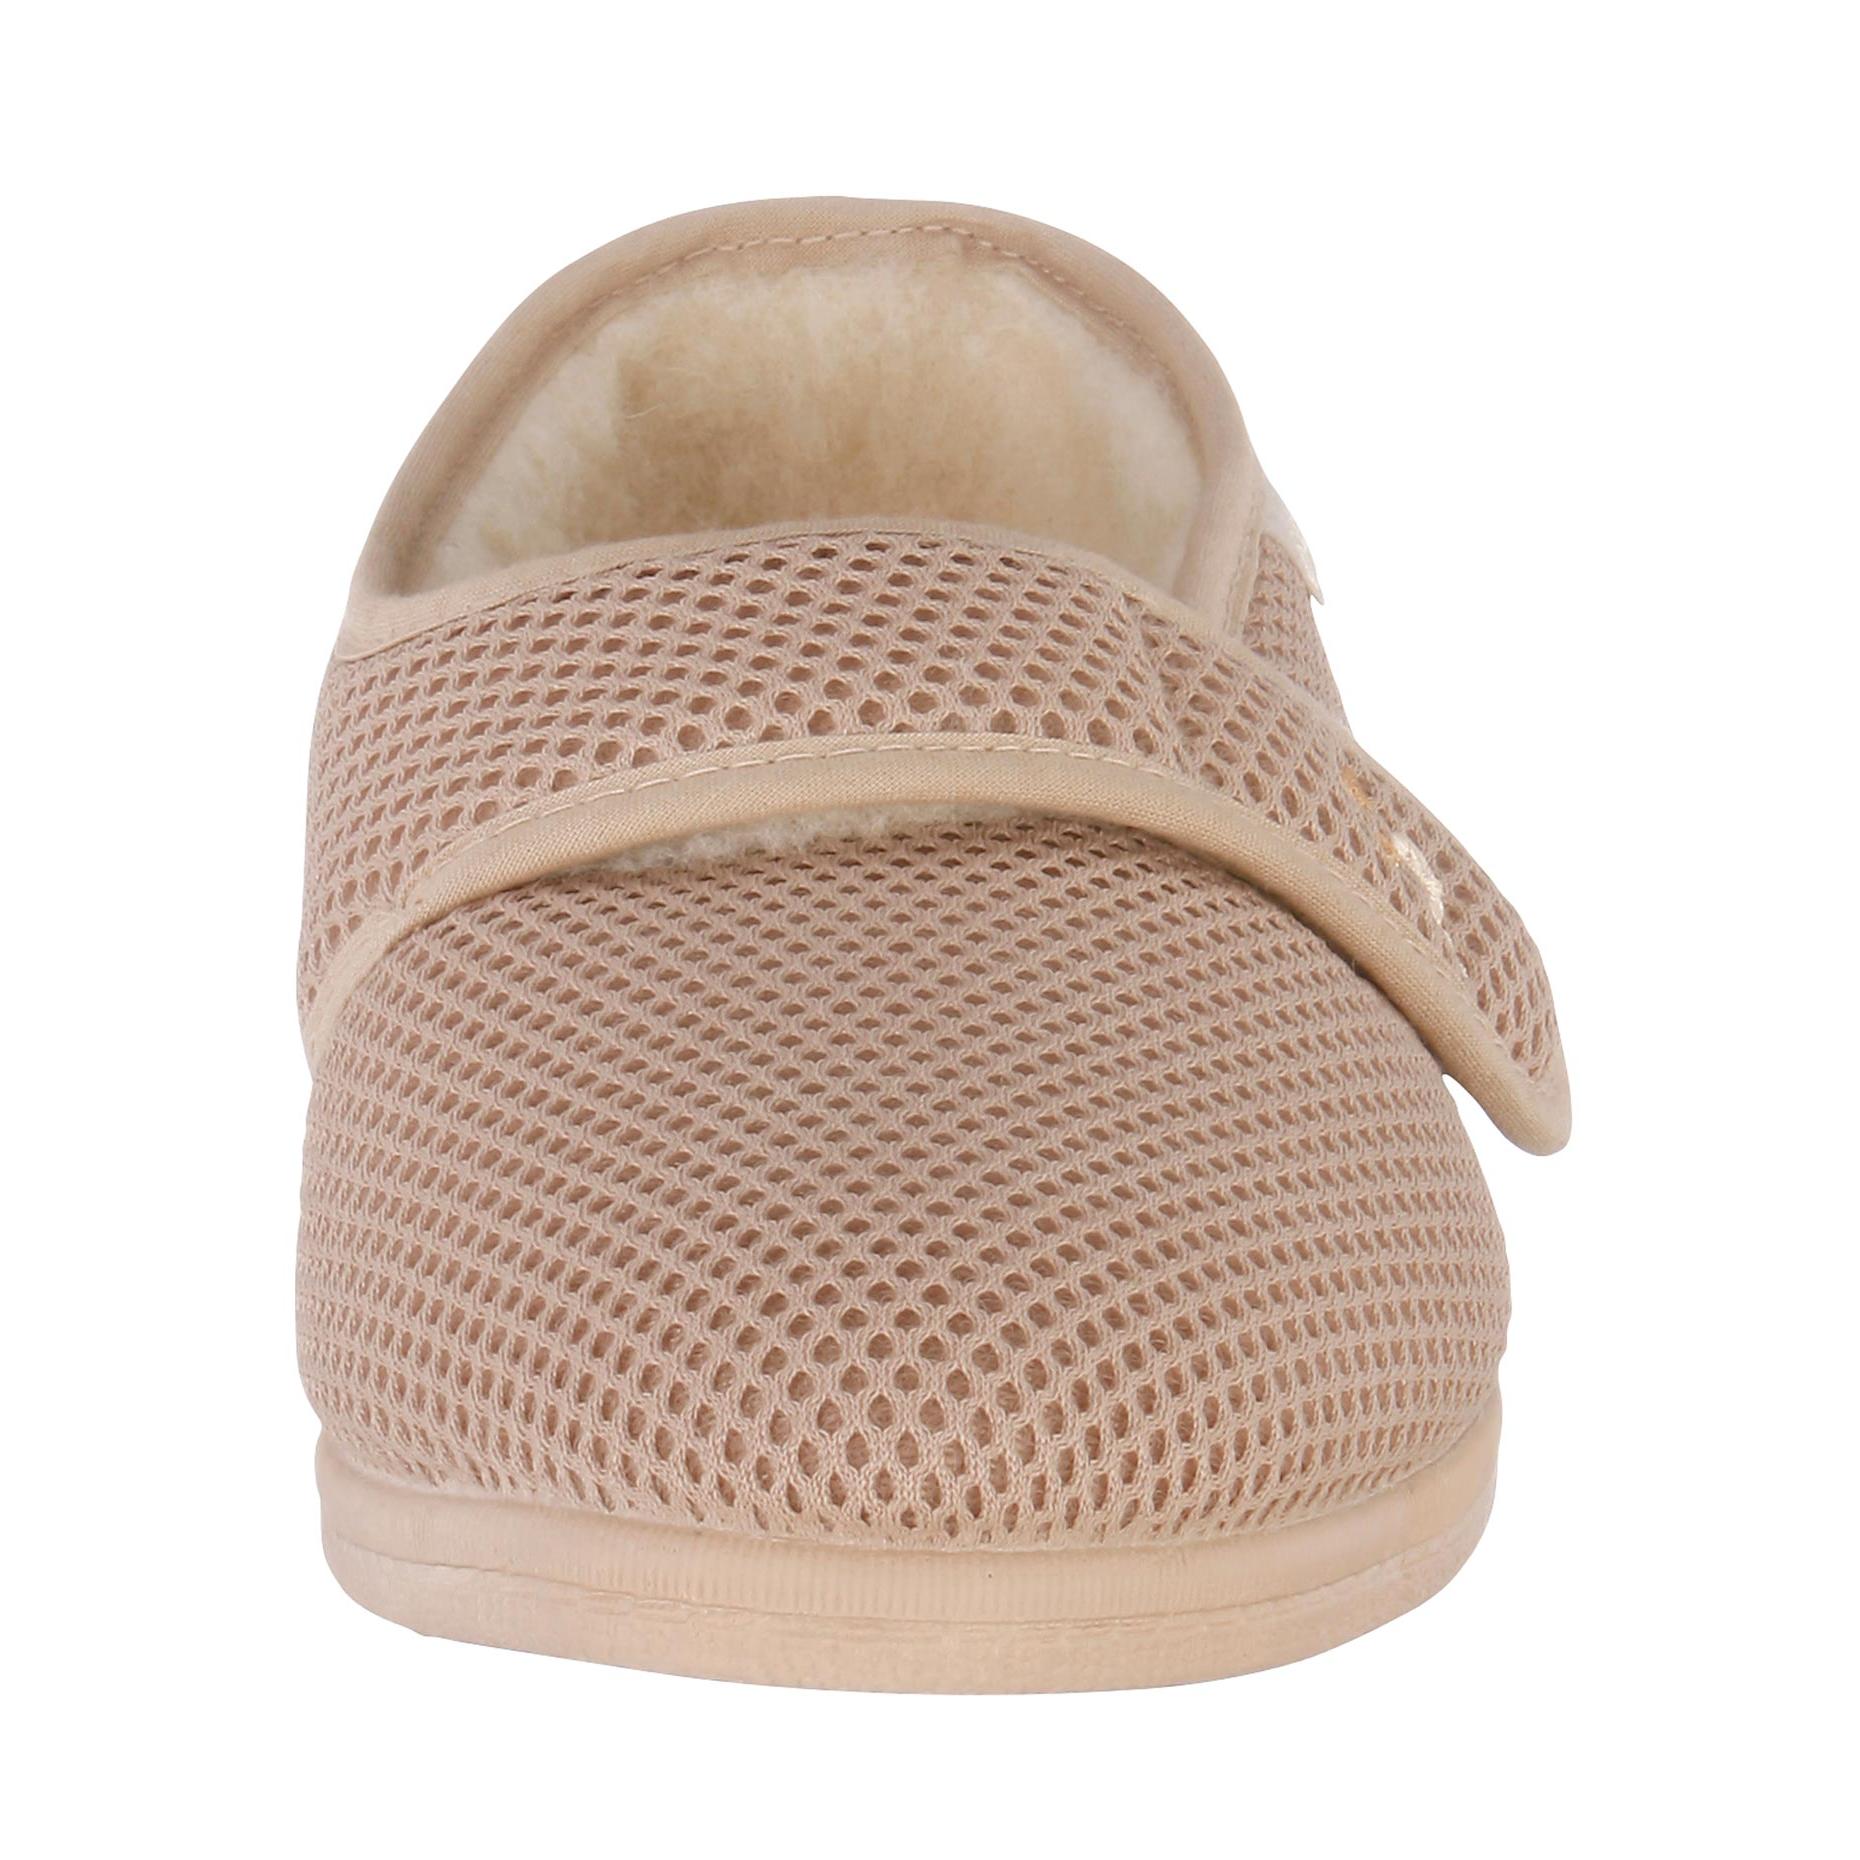 Helline - Chaussons synthétiques beige - Grandes pointures - Sélection  grandshopping.fr